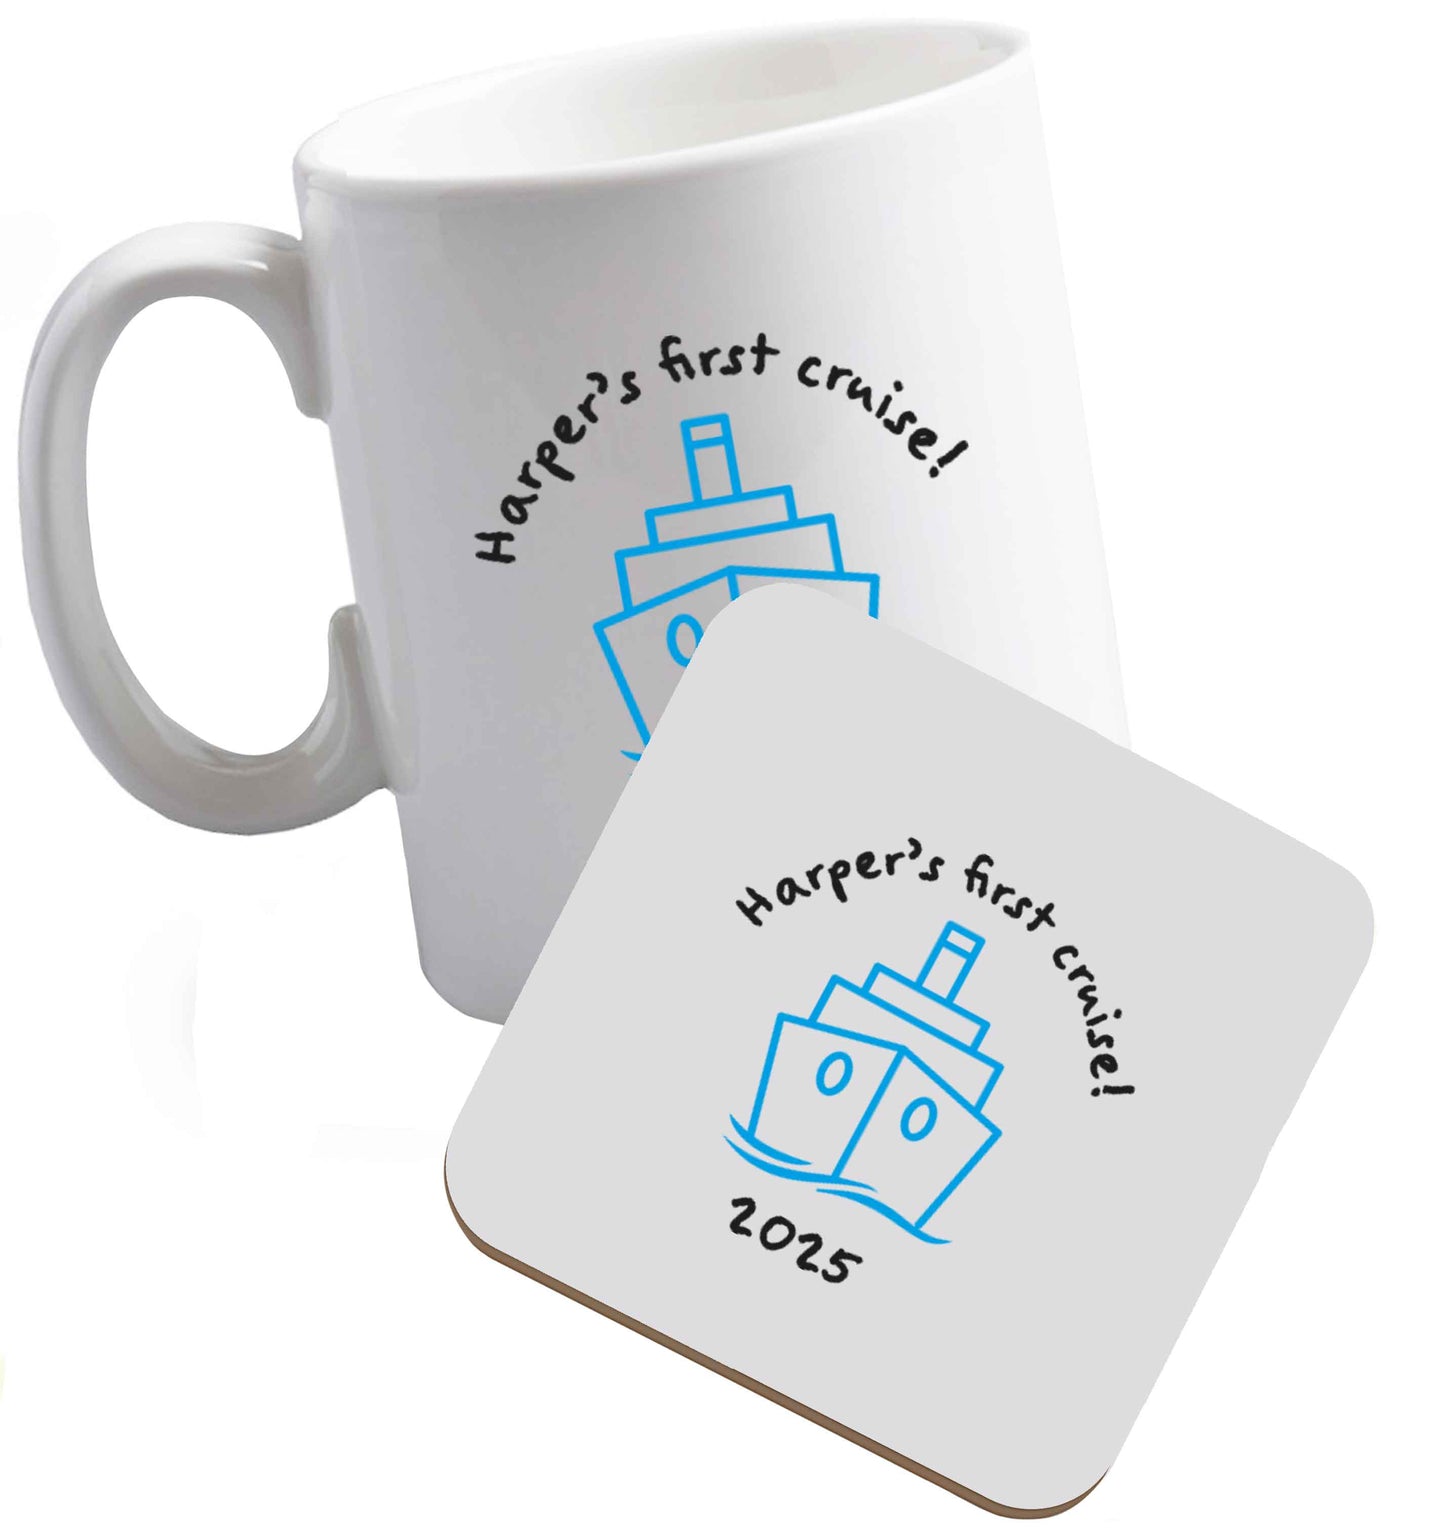 10 oz Personalised first cruise ceramic mug and coaster set right handed